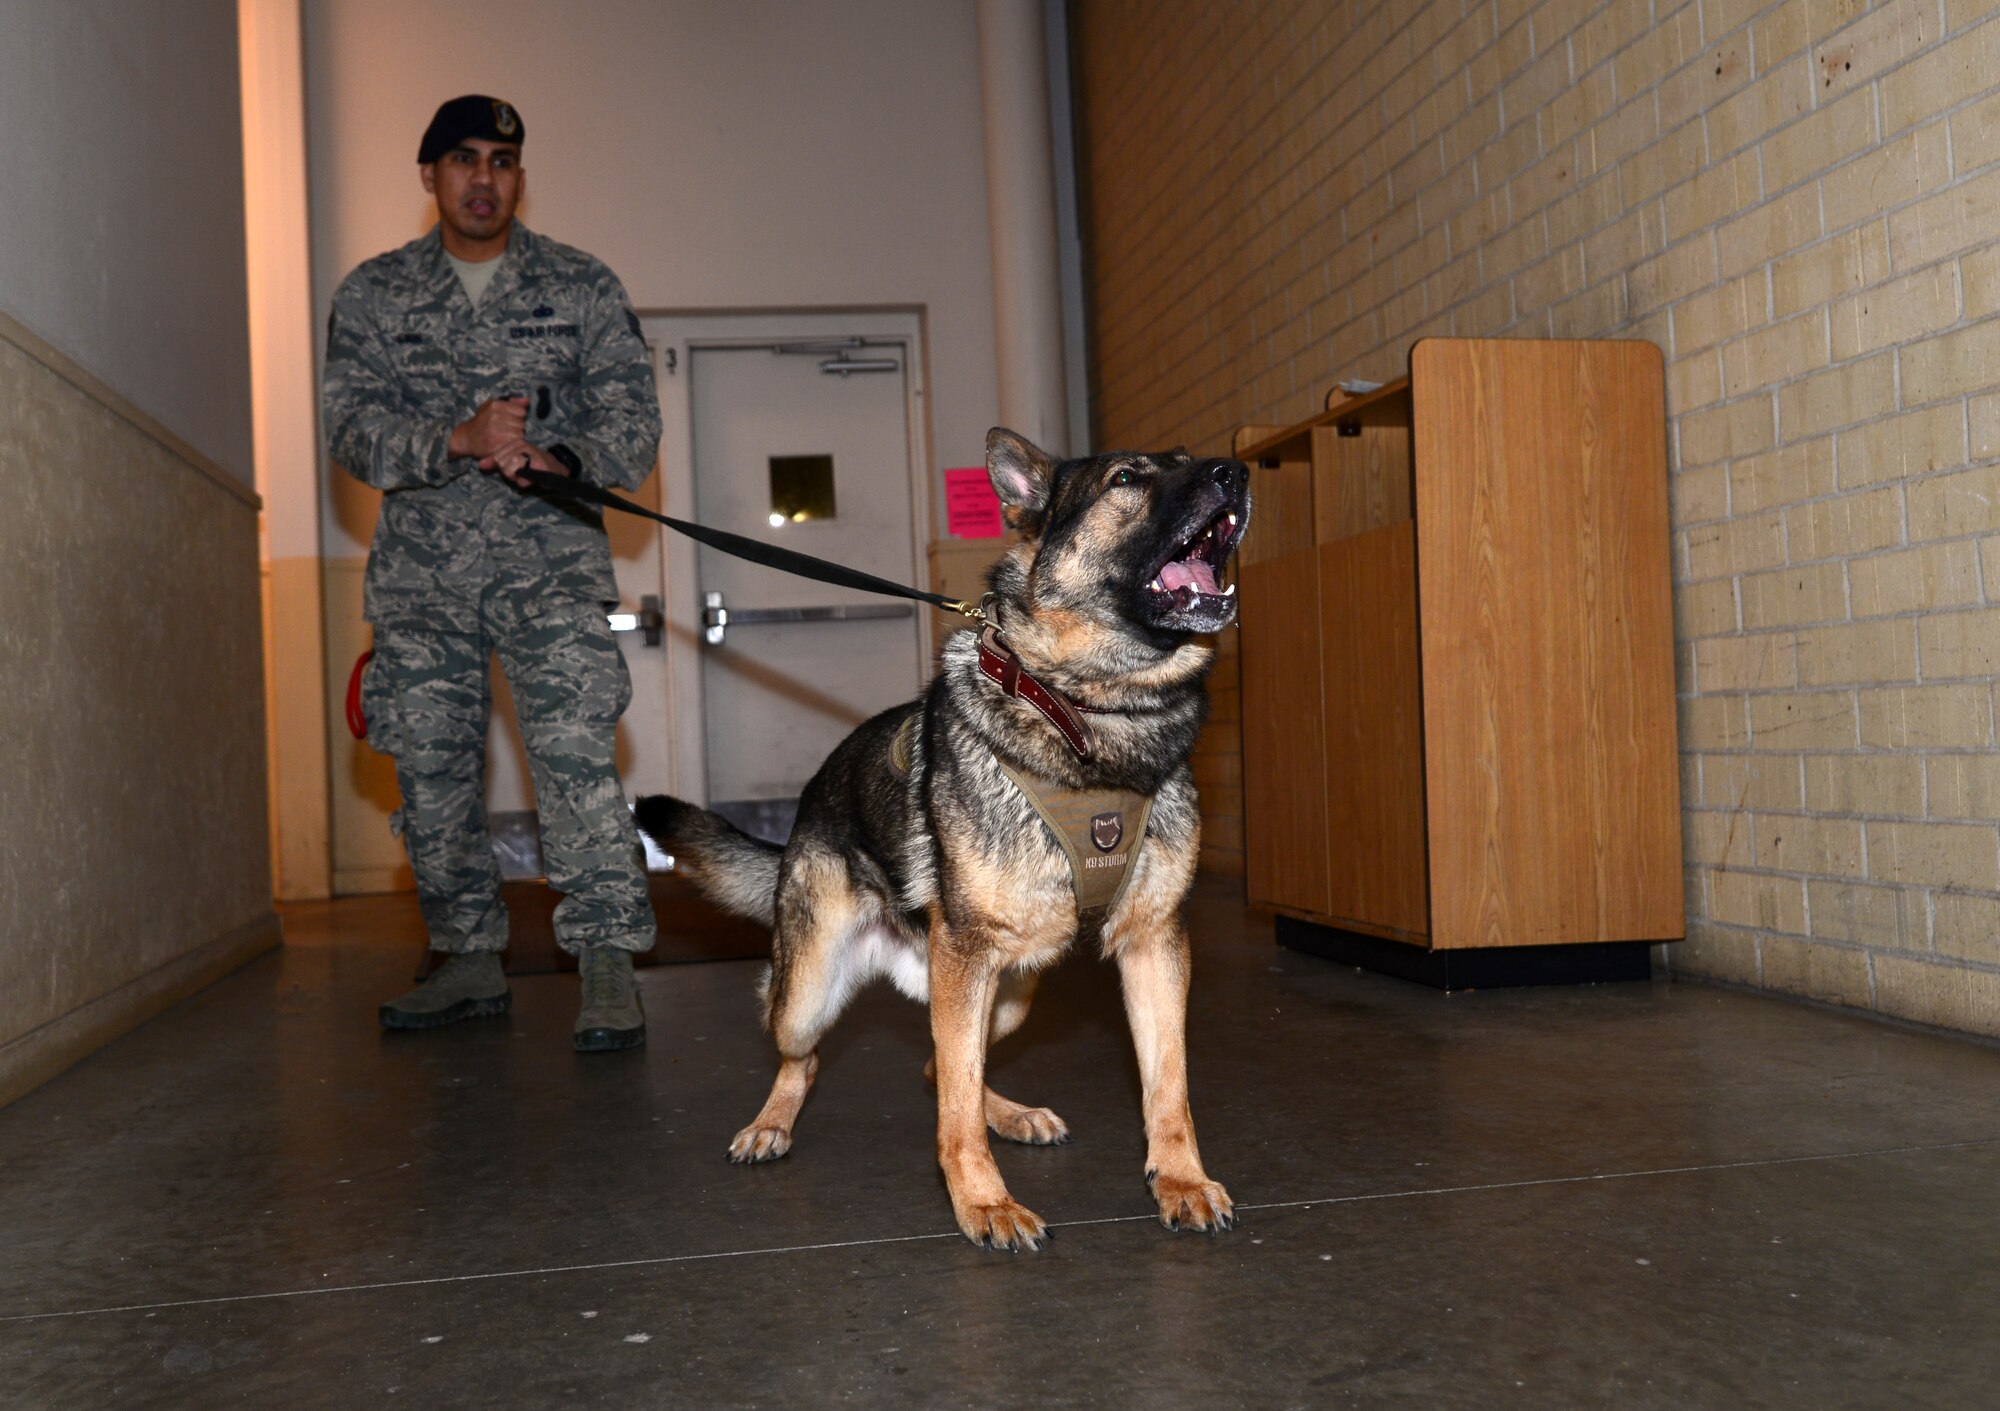 Security Forces members used this opportunity to build relationships with their civilian counterparts and familiarize their K-9s with areas around the city.